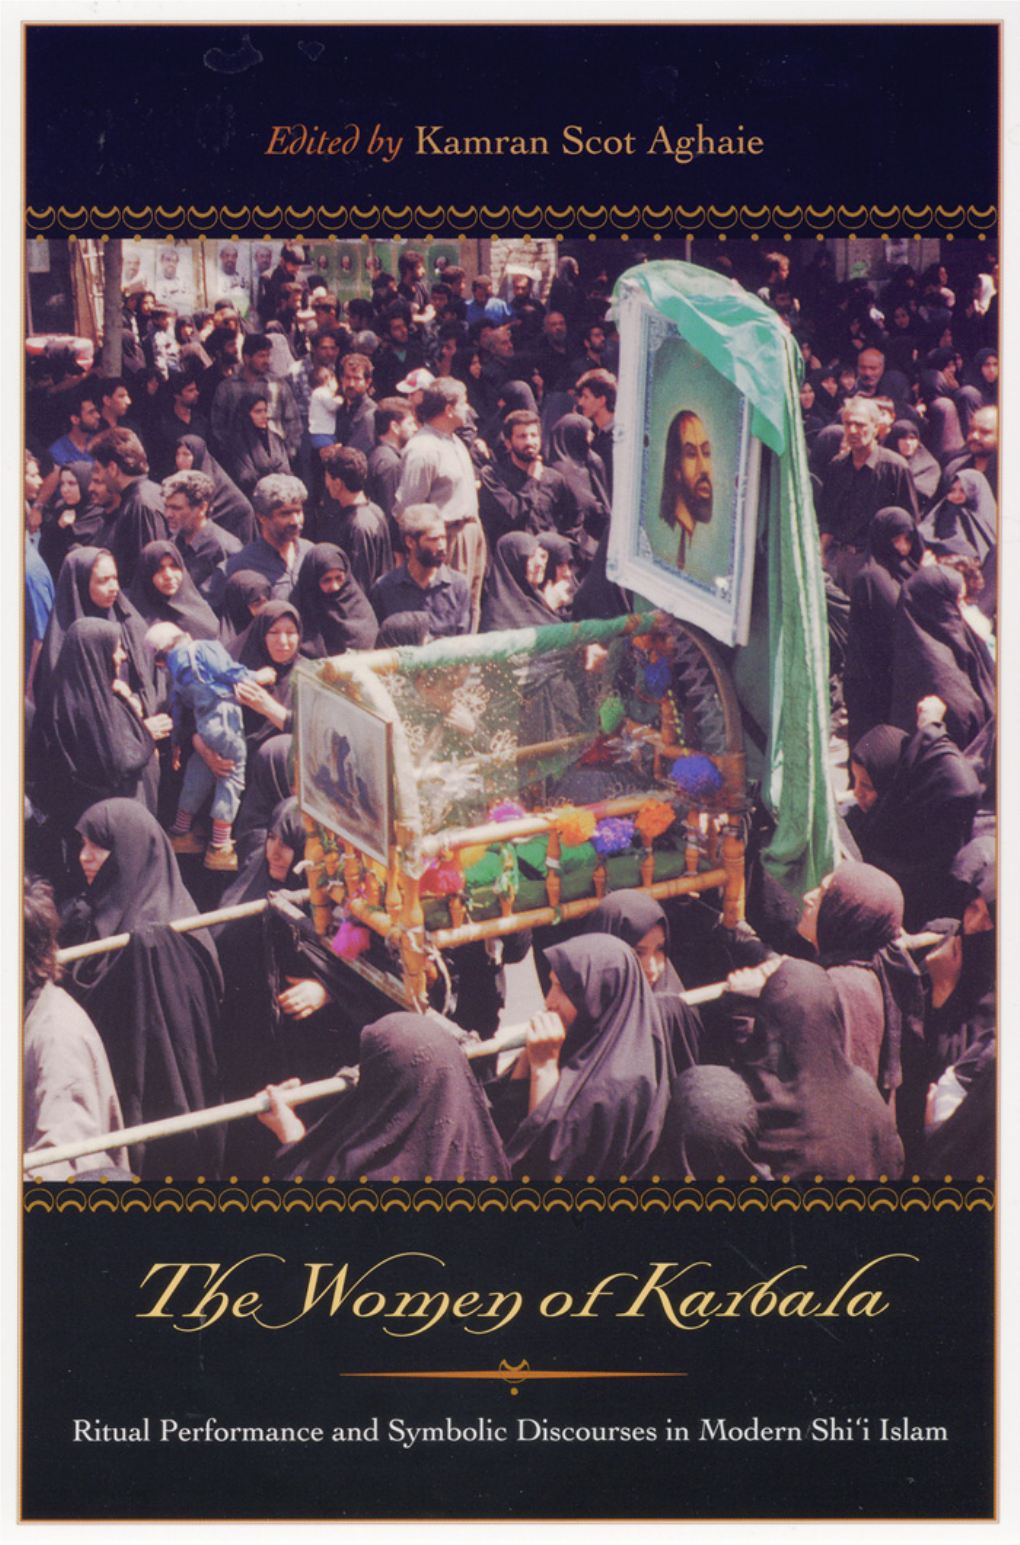 The Women of Karbala THIS PAGE INTENTIONALLY LEFT BLANK the WOMEN of KARBALA Ritual Performance and Symbolic Discourses in Modern Shi�I Islam